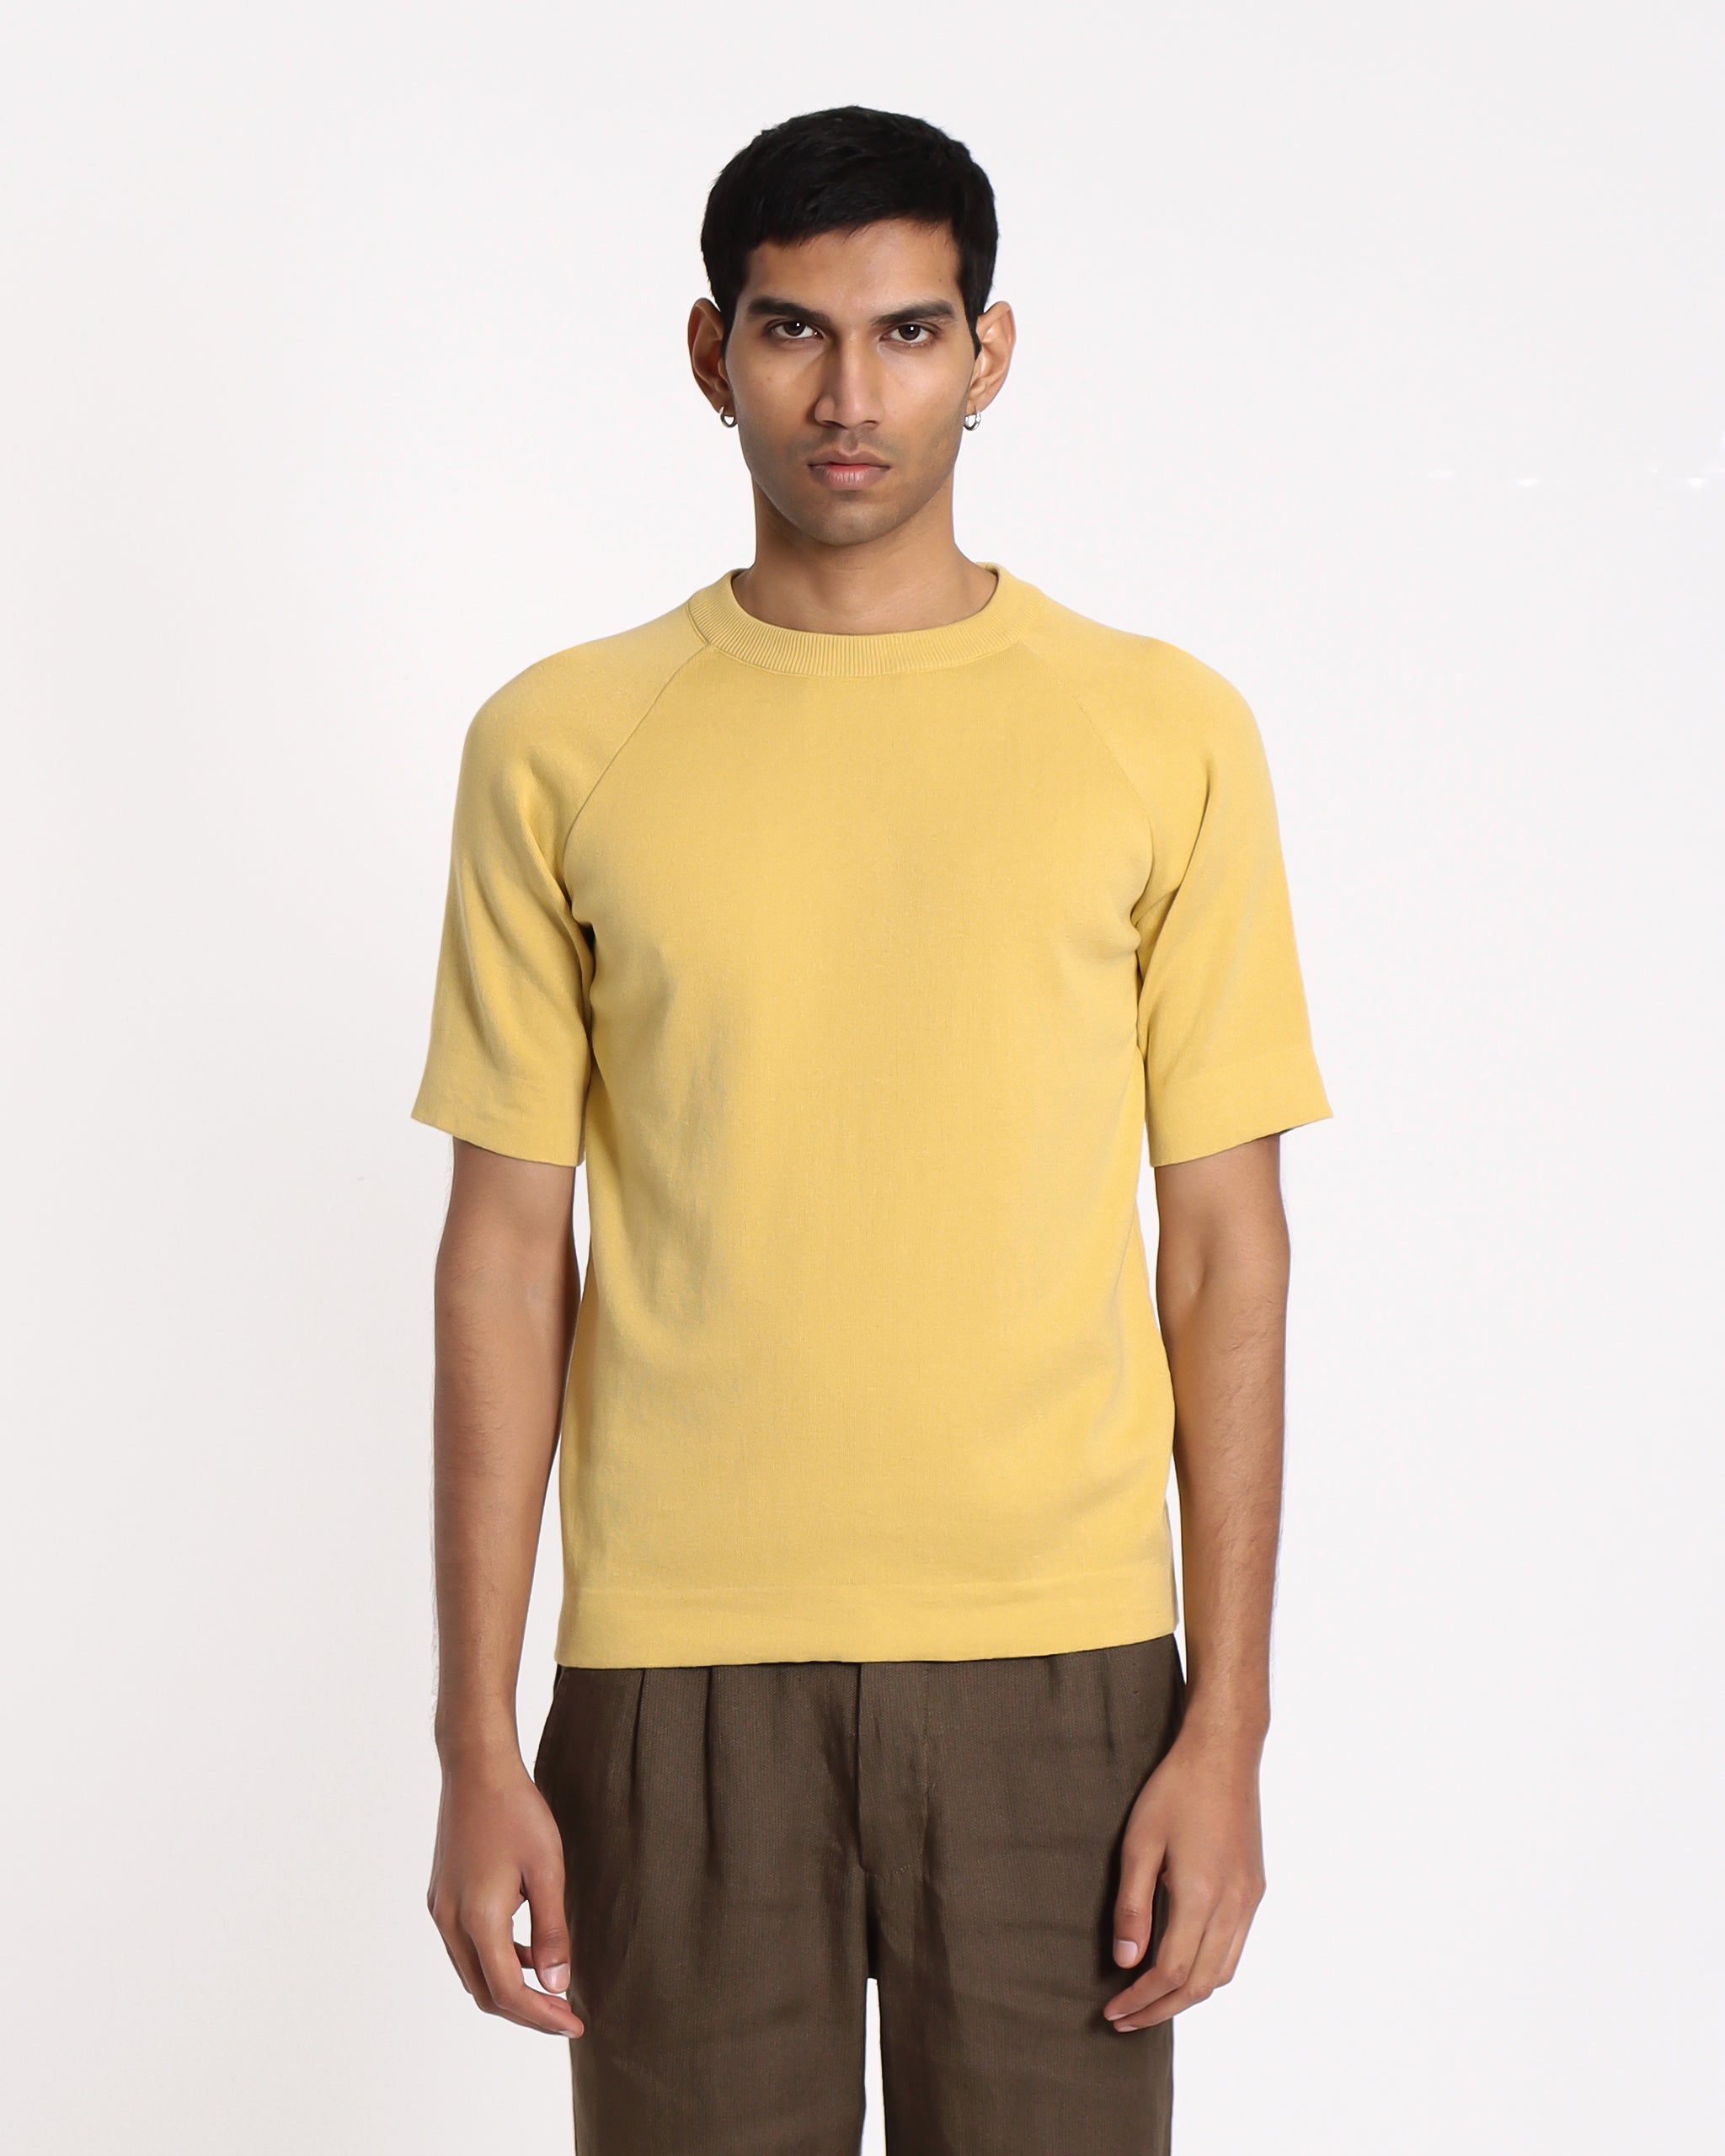 Newport Knitted Top - Dried Moss Yellow